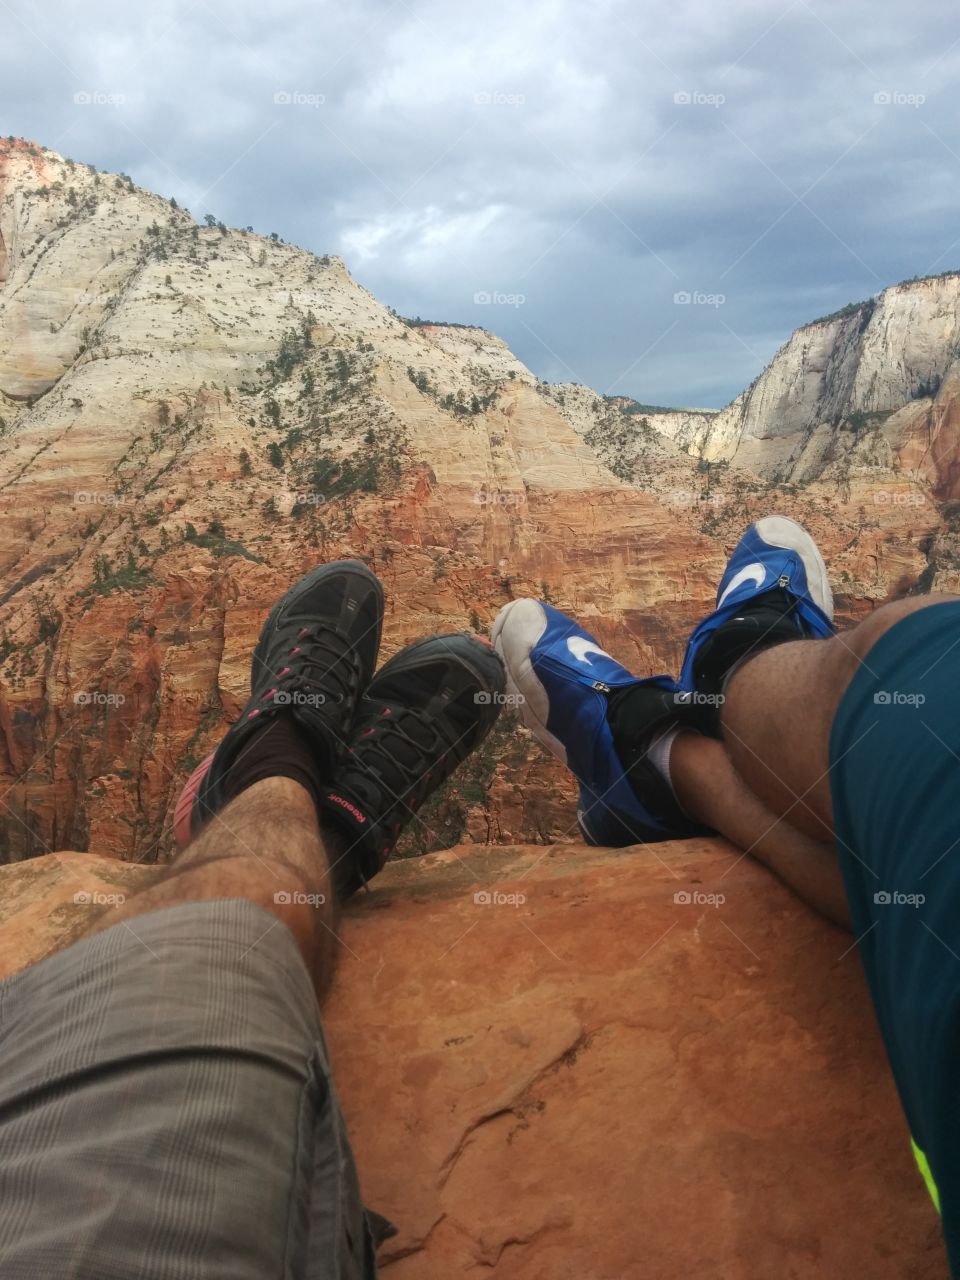 Hiking with a friend. After a strenuous hike with a friend, some relax enjoying our breathtaking prize